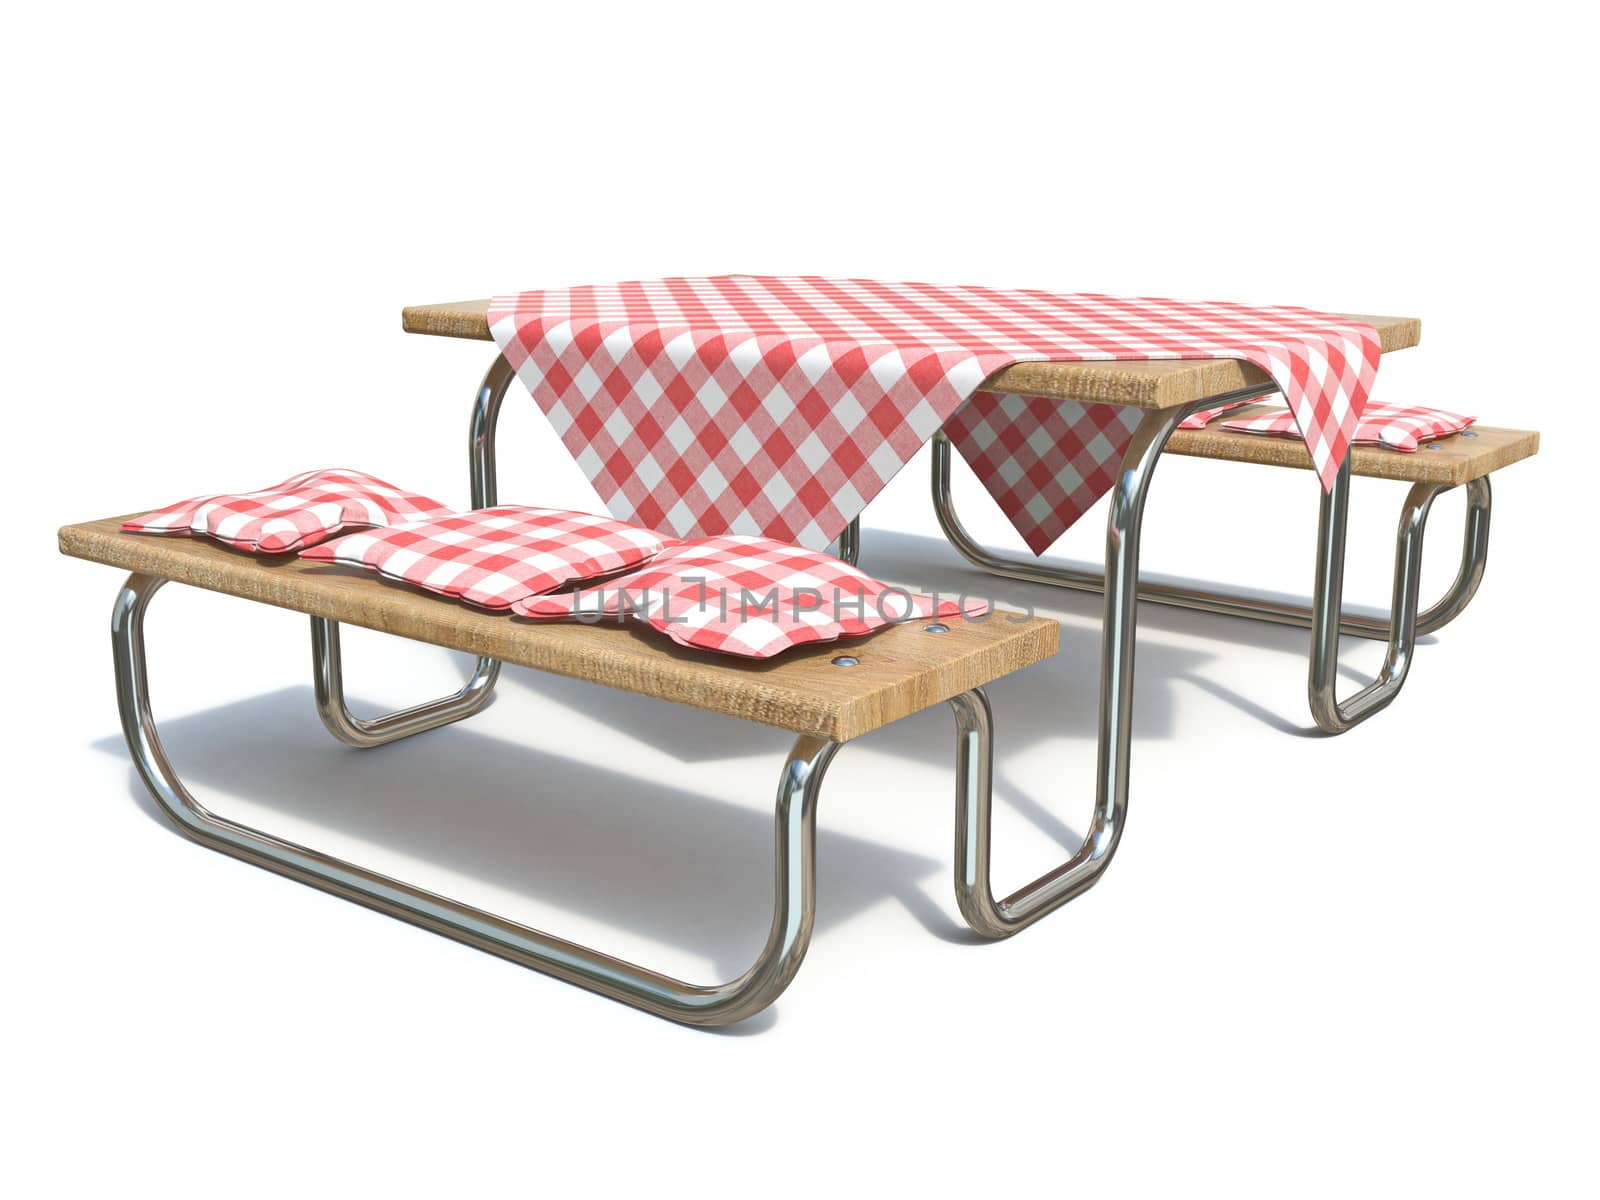 Wooden metal picnic table with red table cover and pillows 3D render illustration isolated on white background